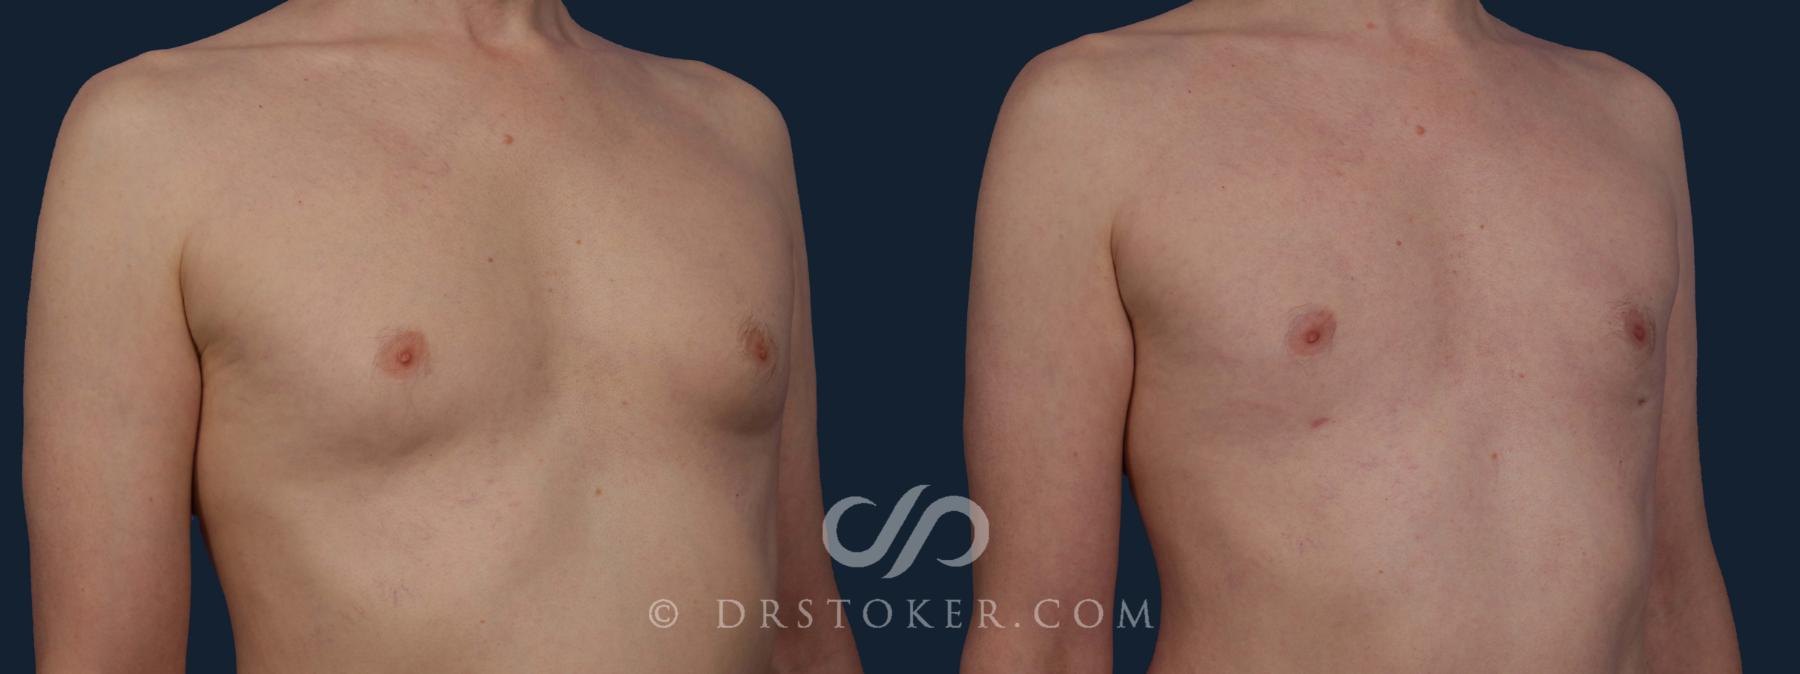 Before & After Breast Reduction for Men (Gynecomastia) Case 1960 Right Oblique View in Los Angeles, CA